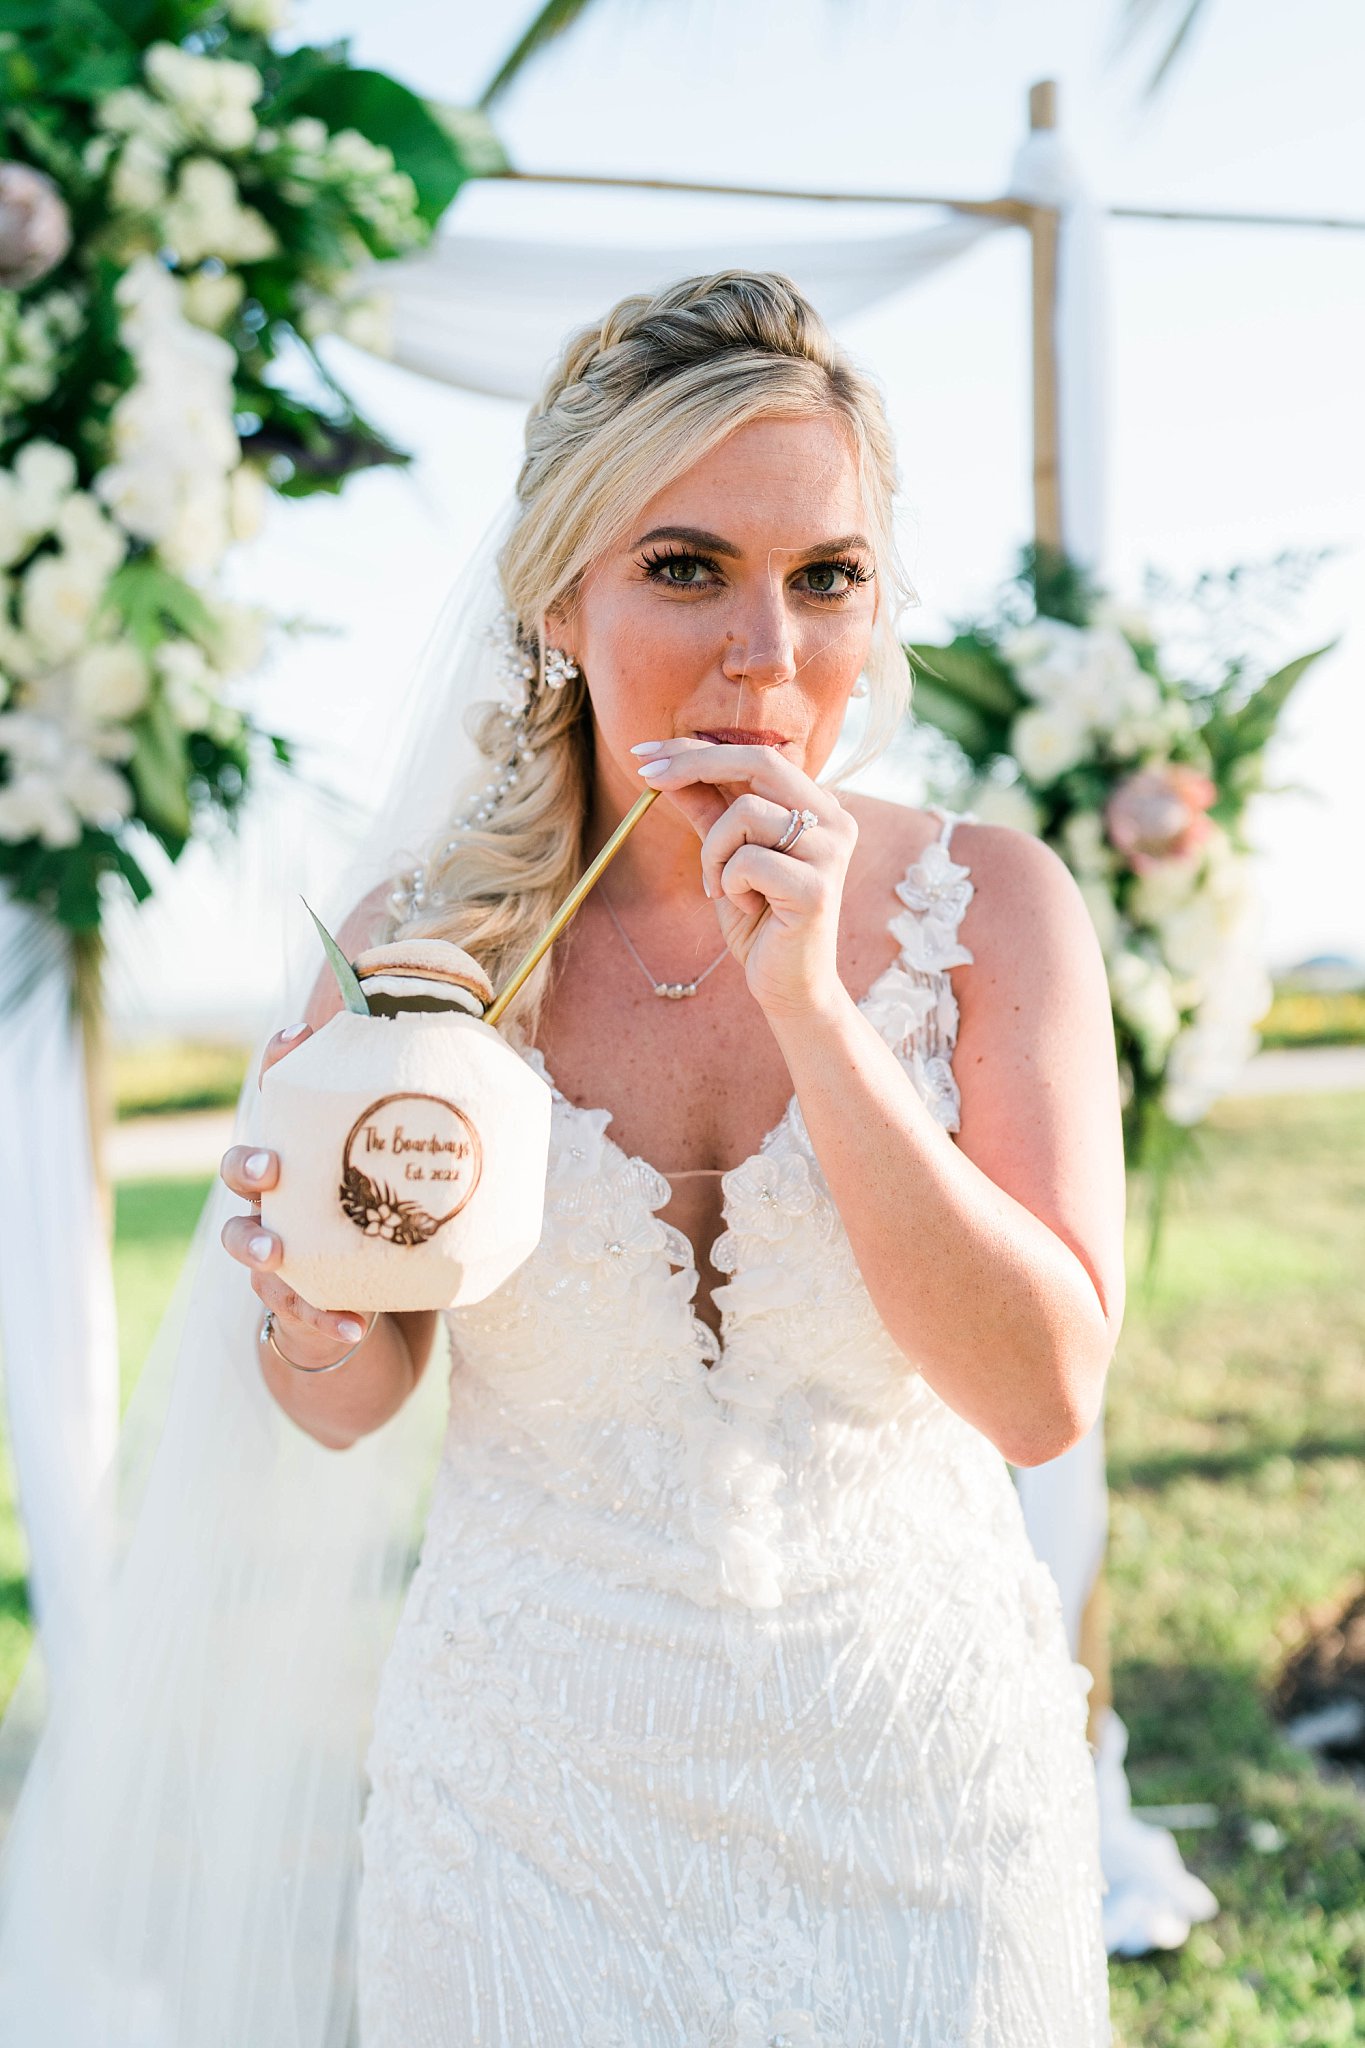 tropical bridal style bride drinks out of coconut on tropical wedding day in FLorida